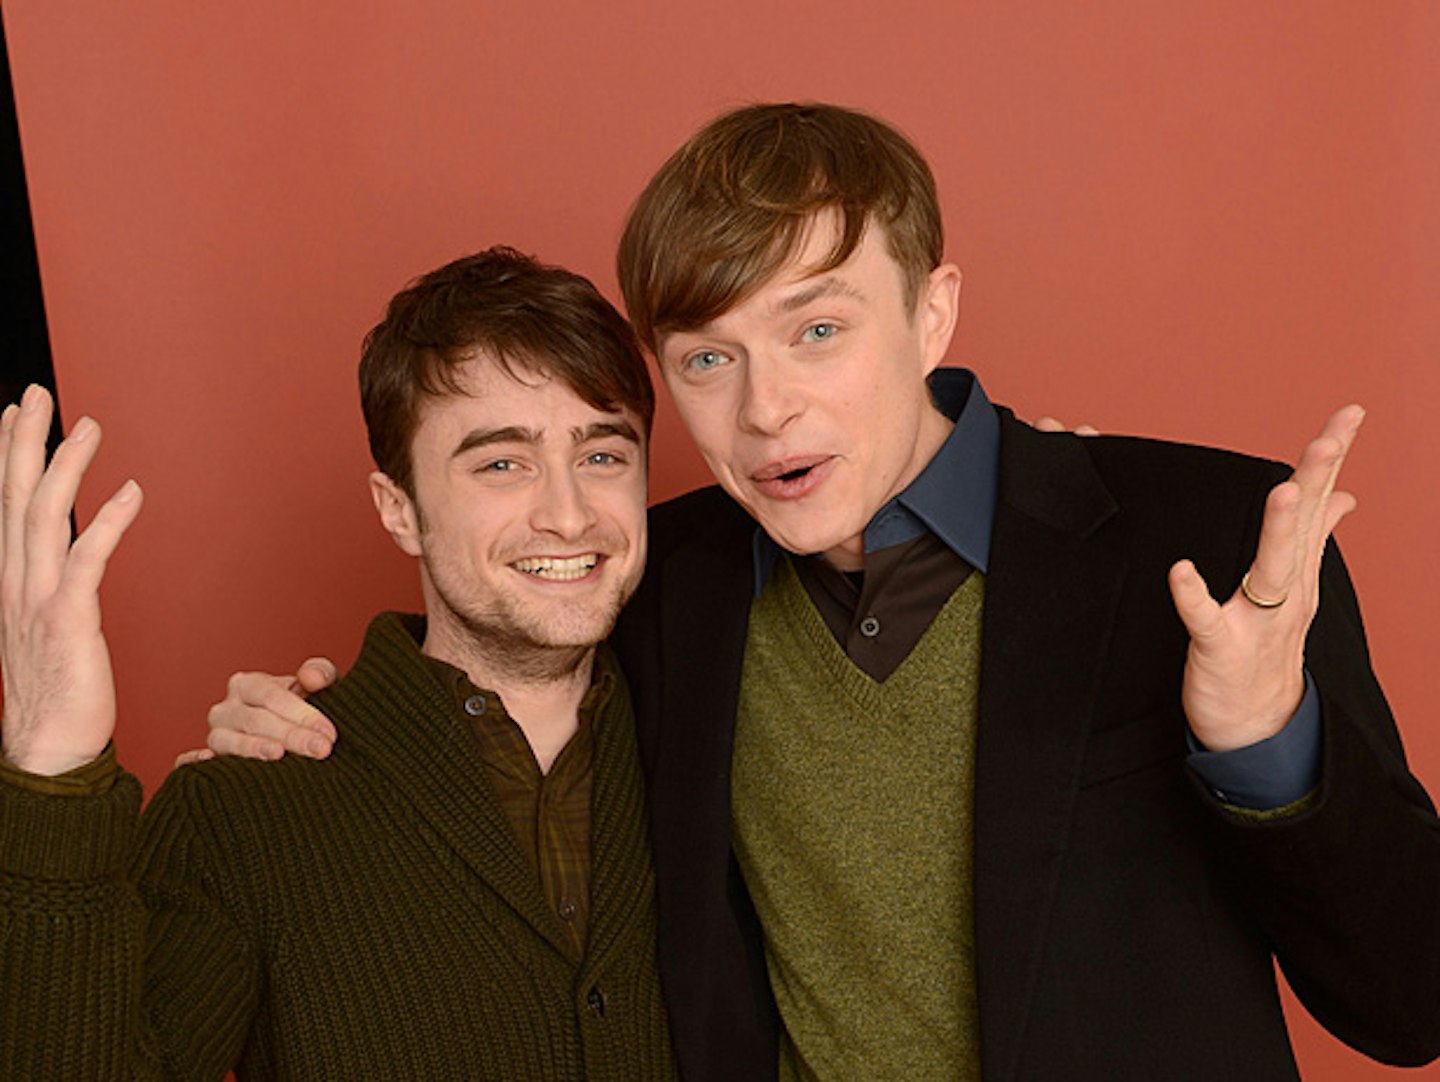 Daniel-Radcliffe-Will-Be-One-Of-The-College-Republicans